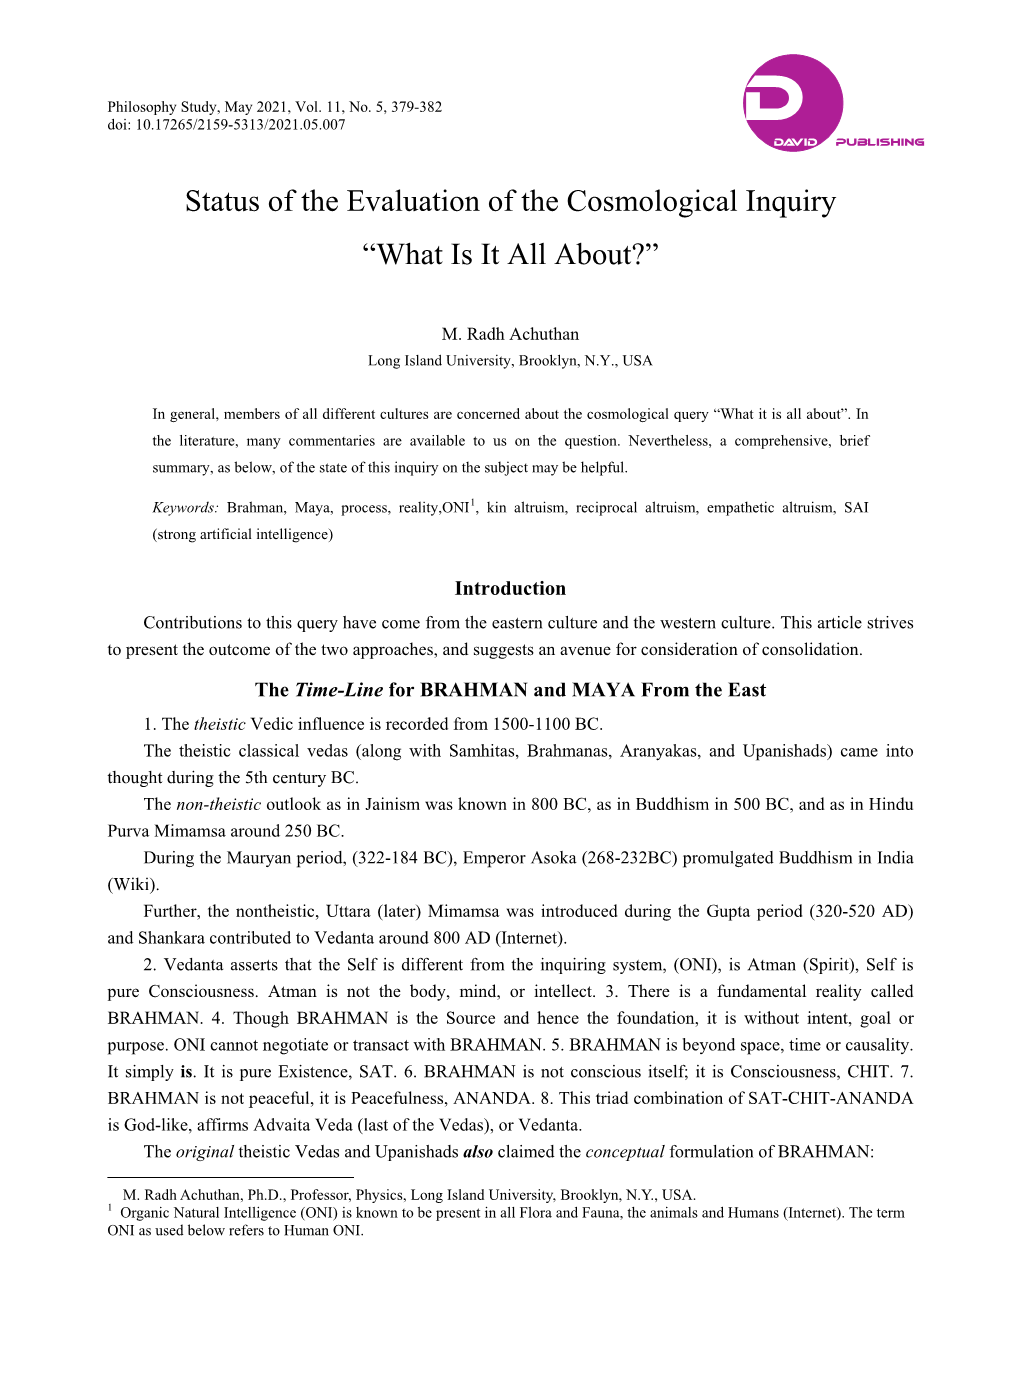 Status of the Evaluation of the Cosmological Inquiry “What Is It All About?”